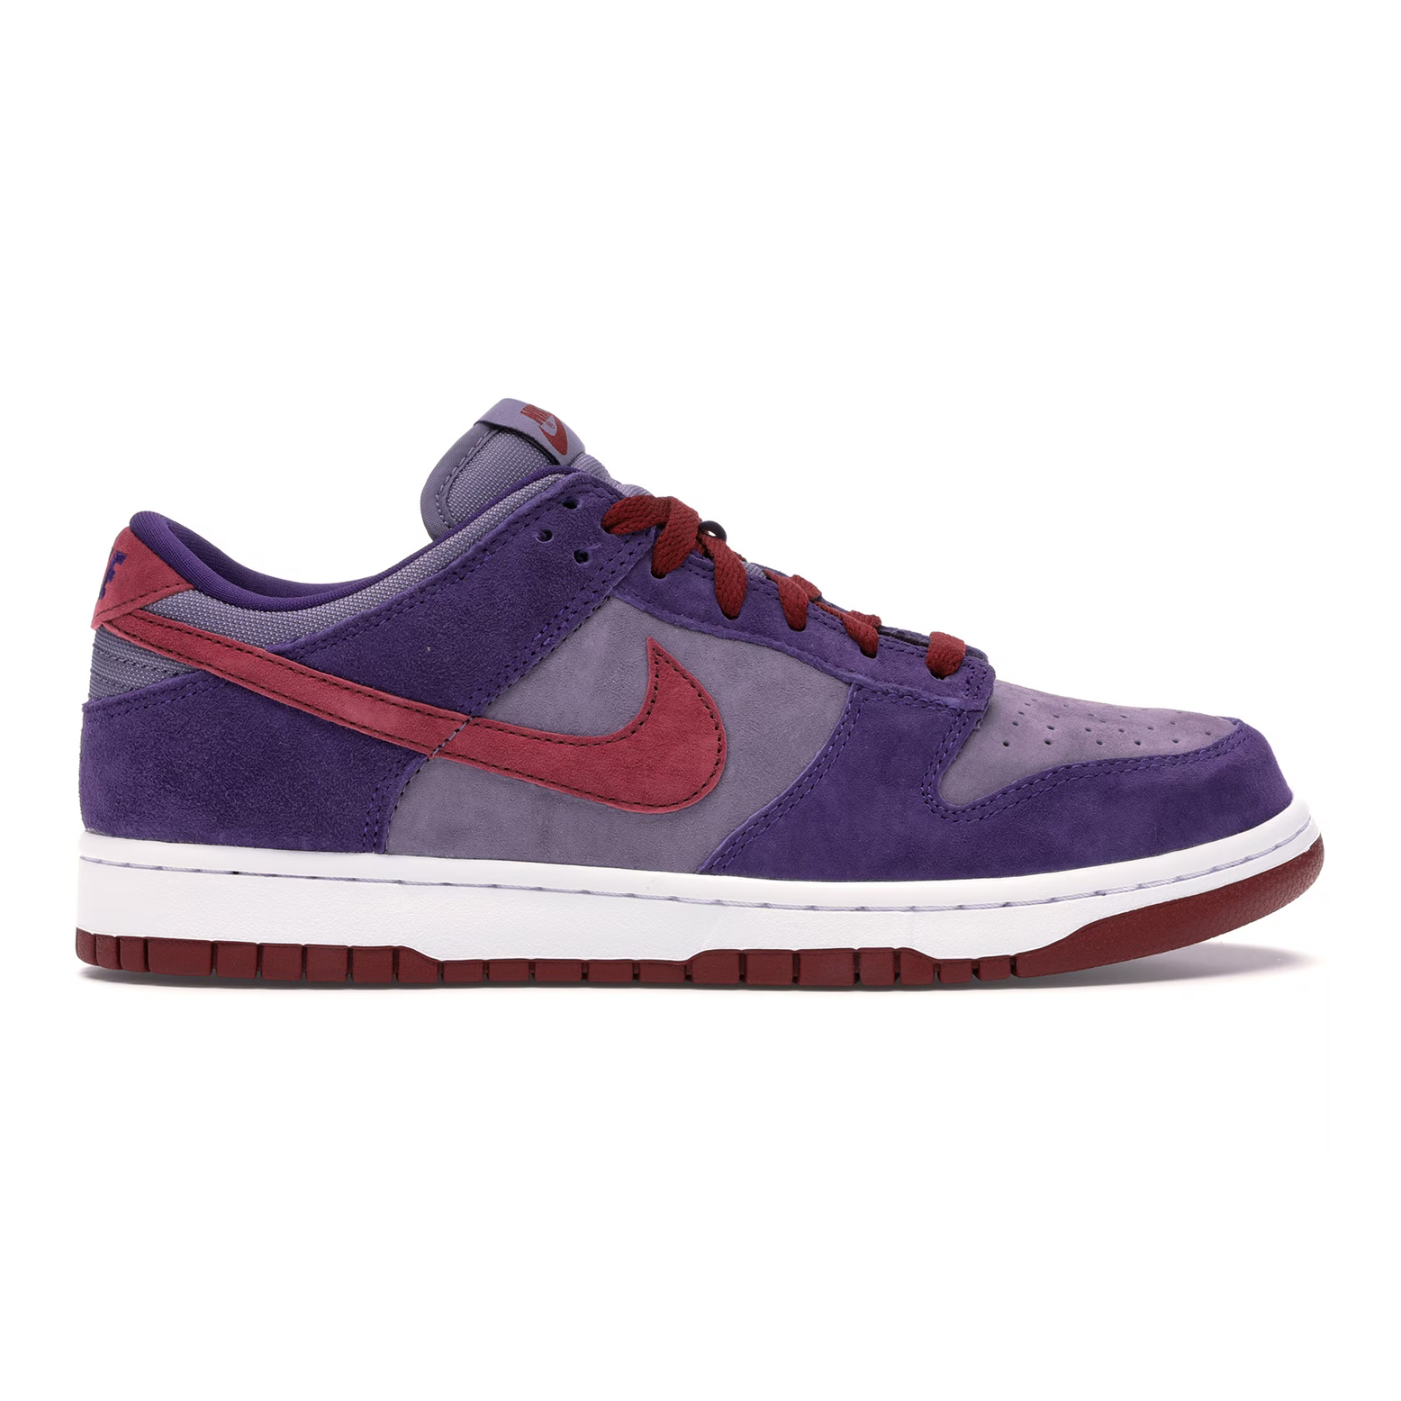 Lingakick Official Online Store » Nike Dunk Low Plum (2020)